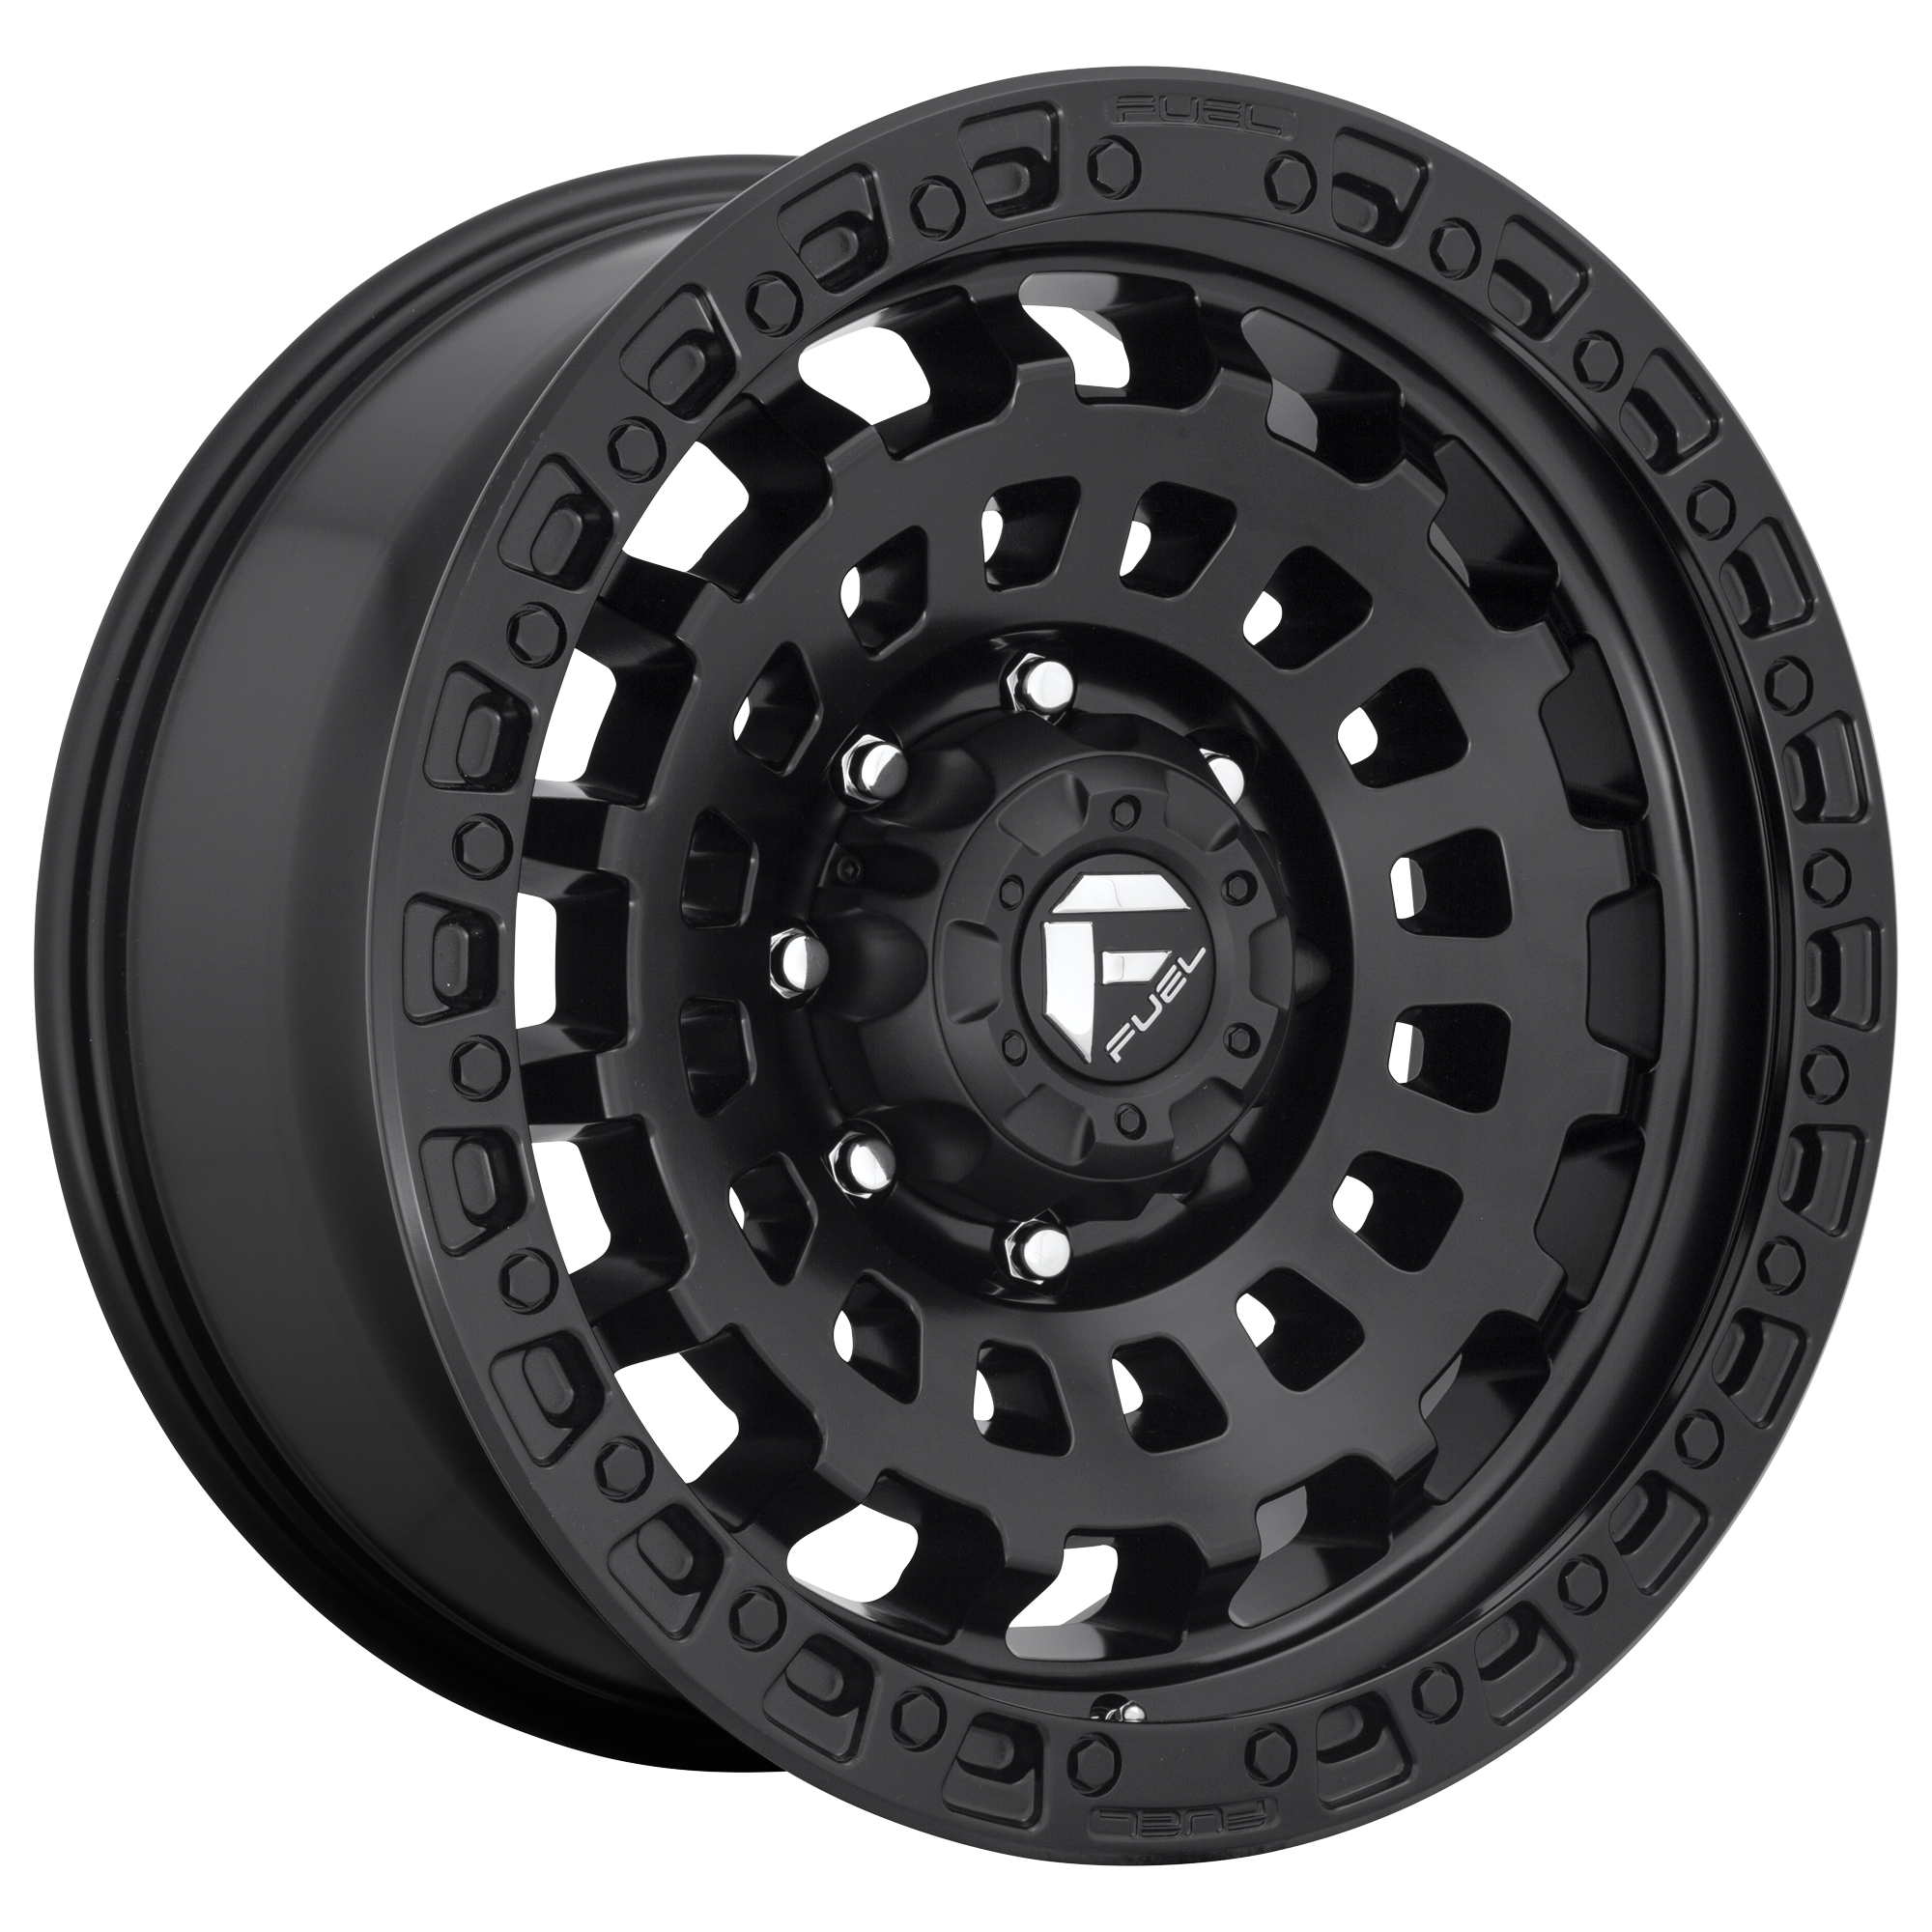 ZEPHYR 20x9 8x170.00 MATTE BLACK (1 mm) - Tires and Engine Performance